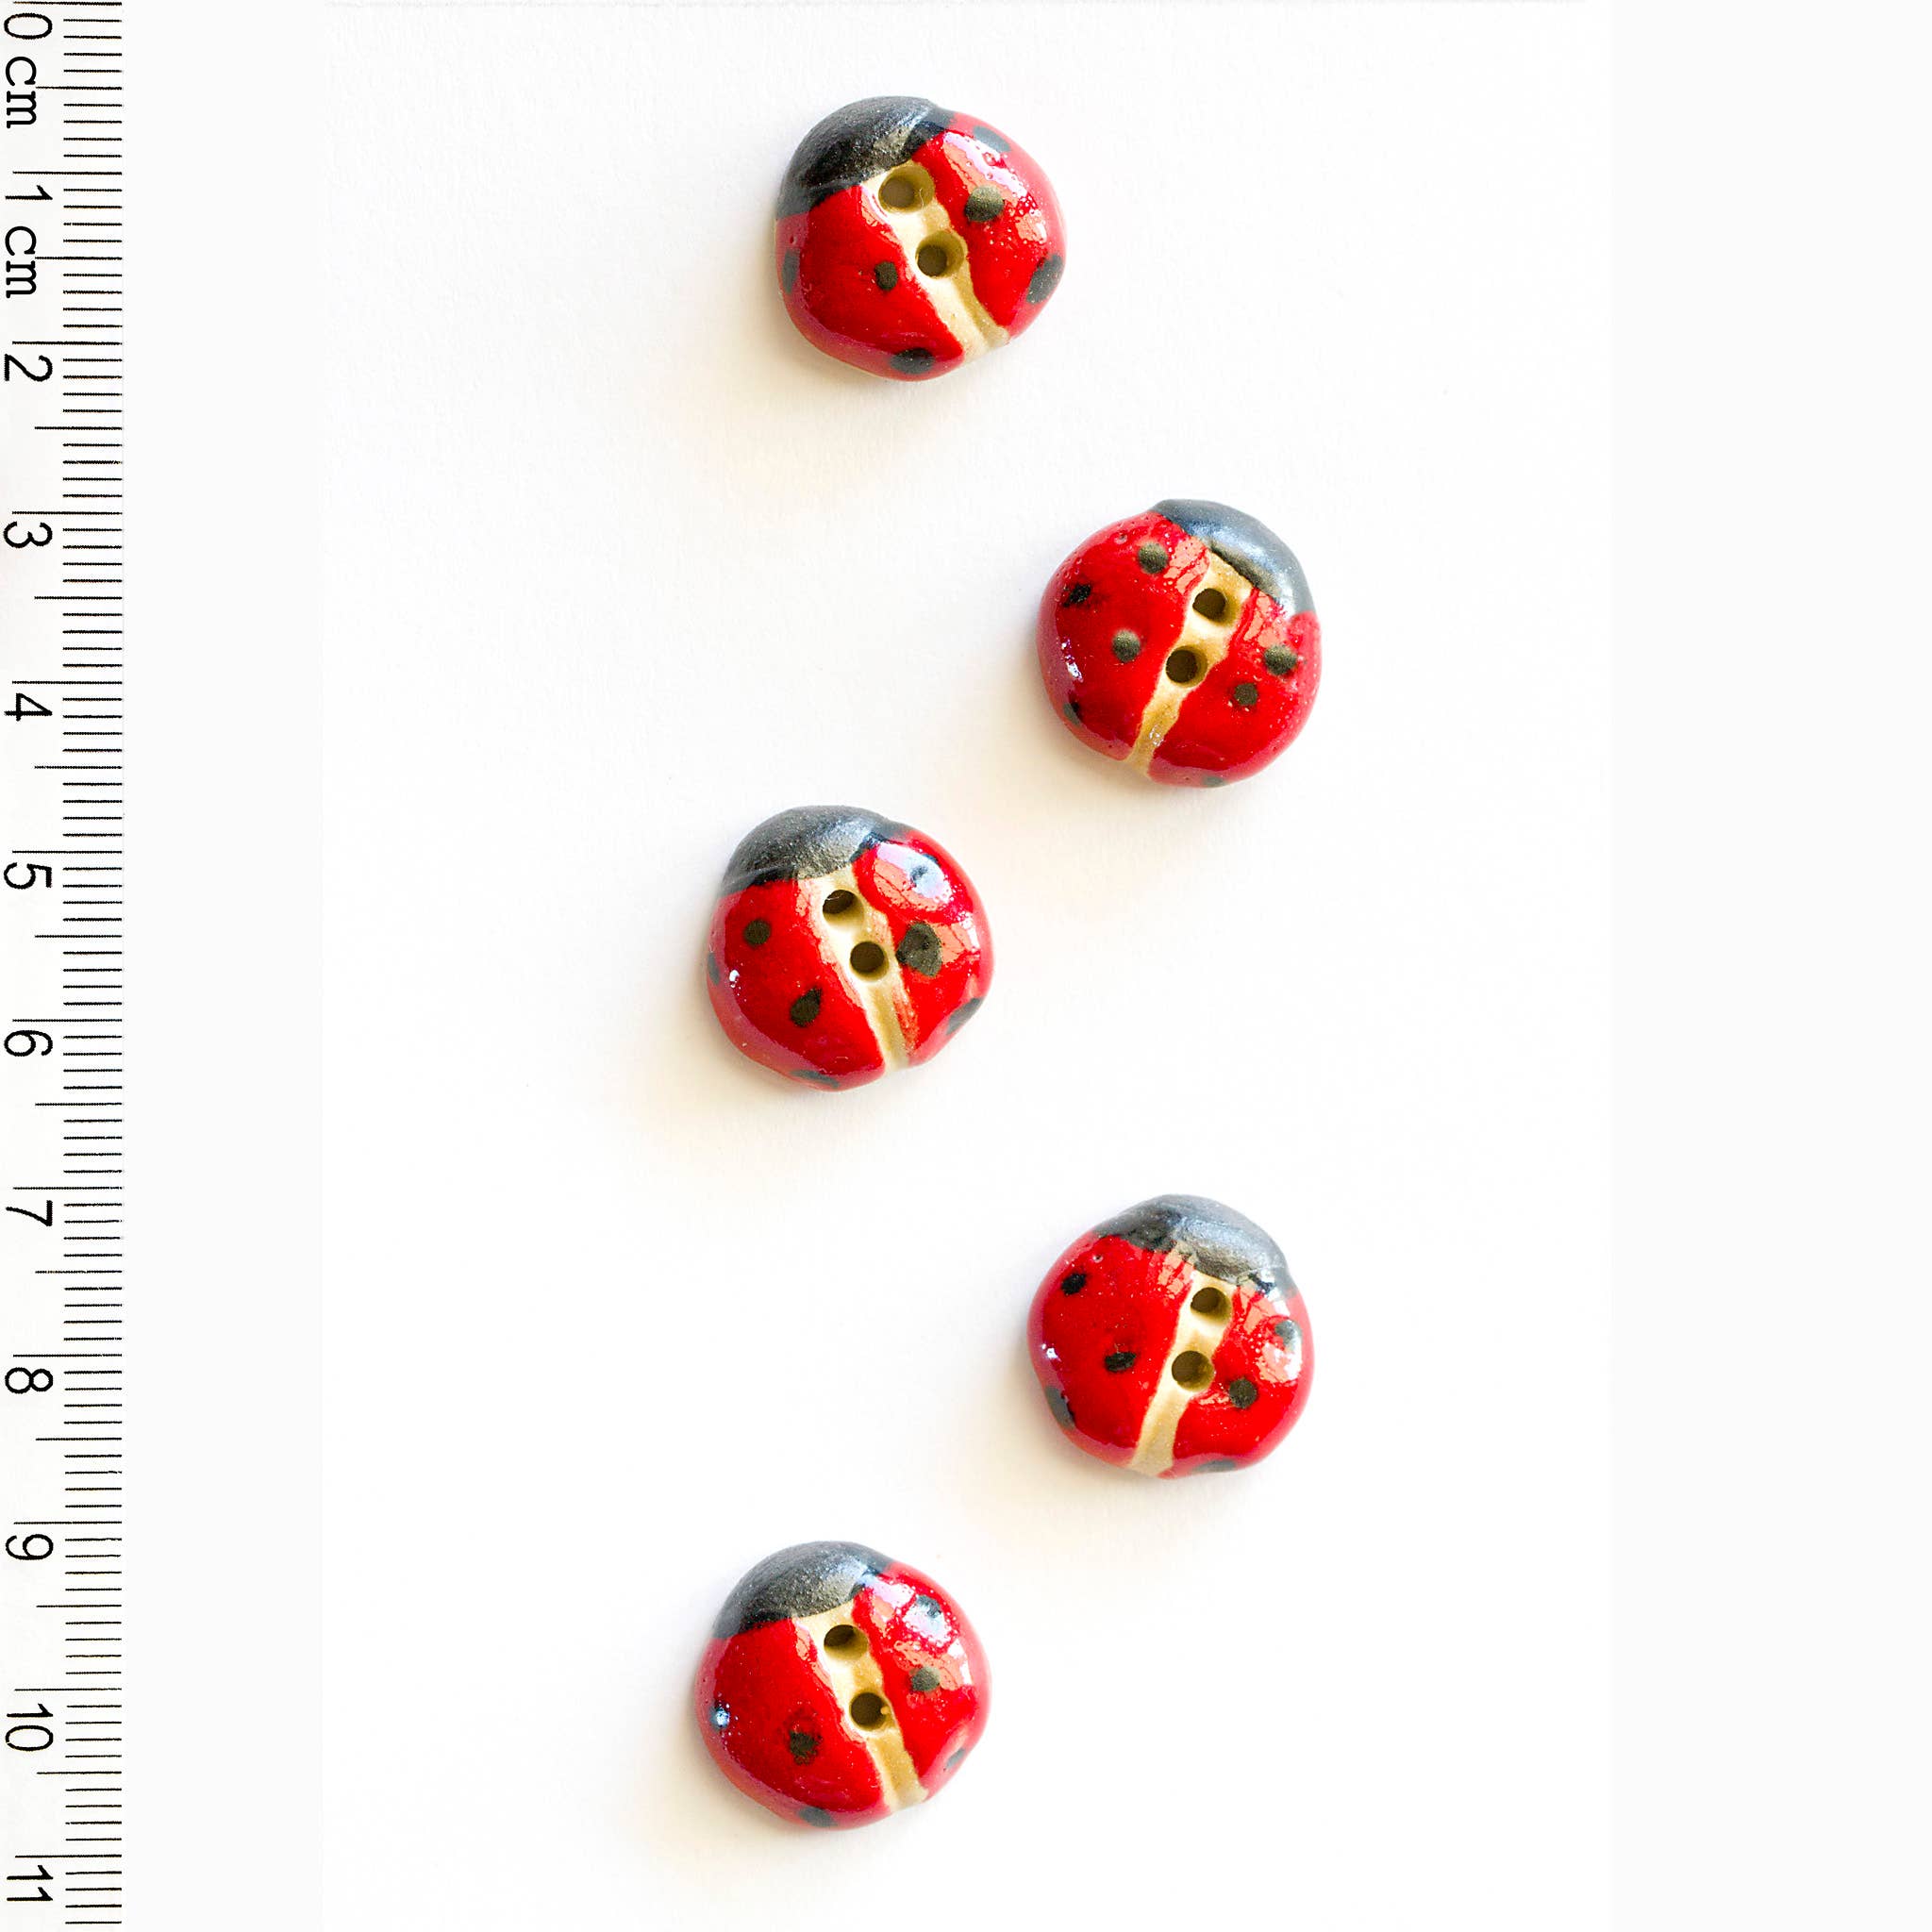 Incomparable Buttons - 5 Red Ladybird Buttons